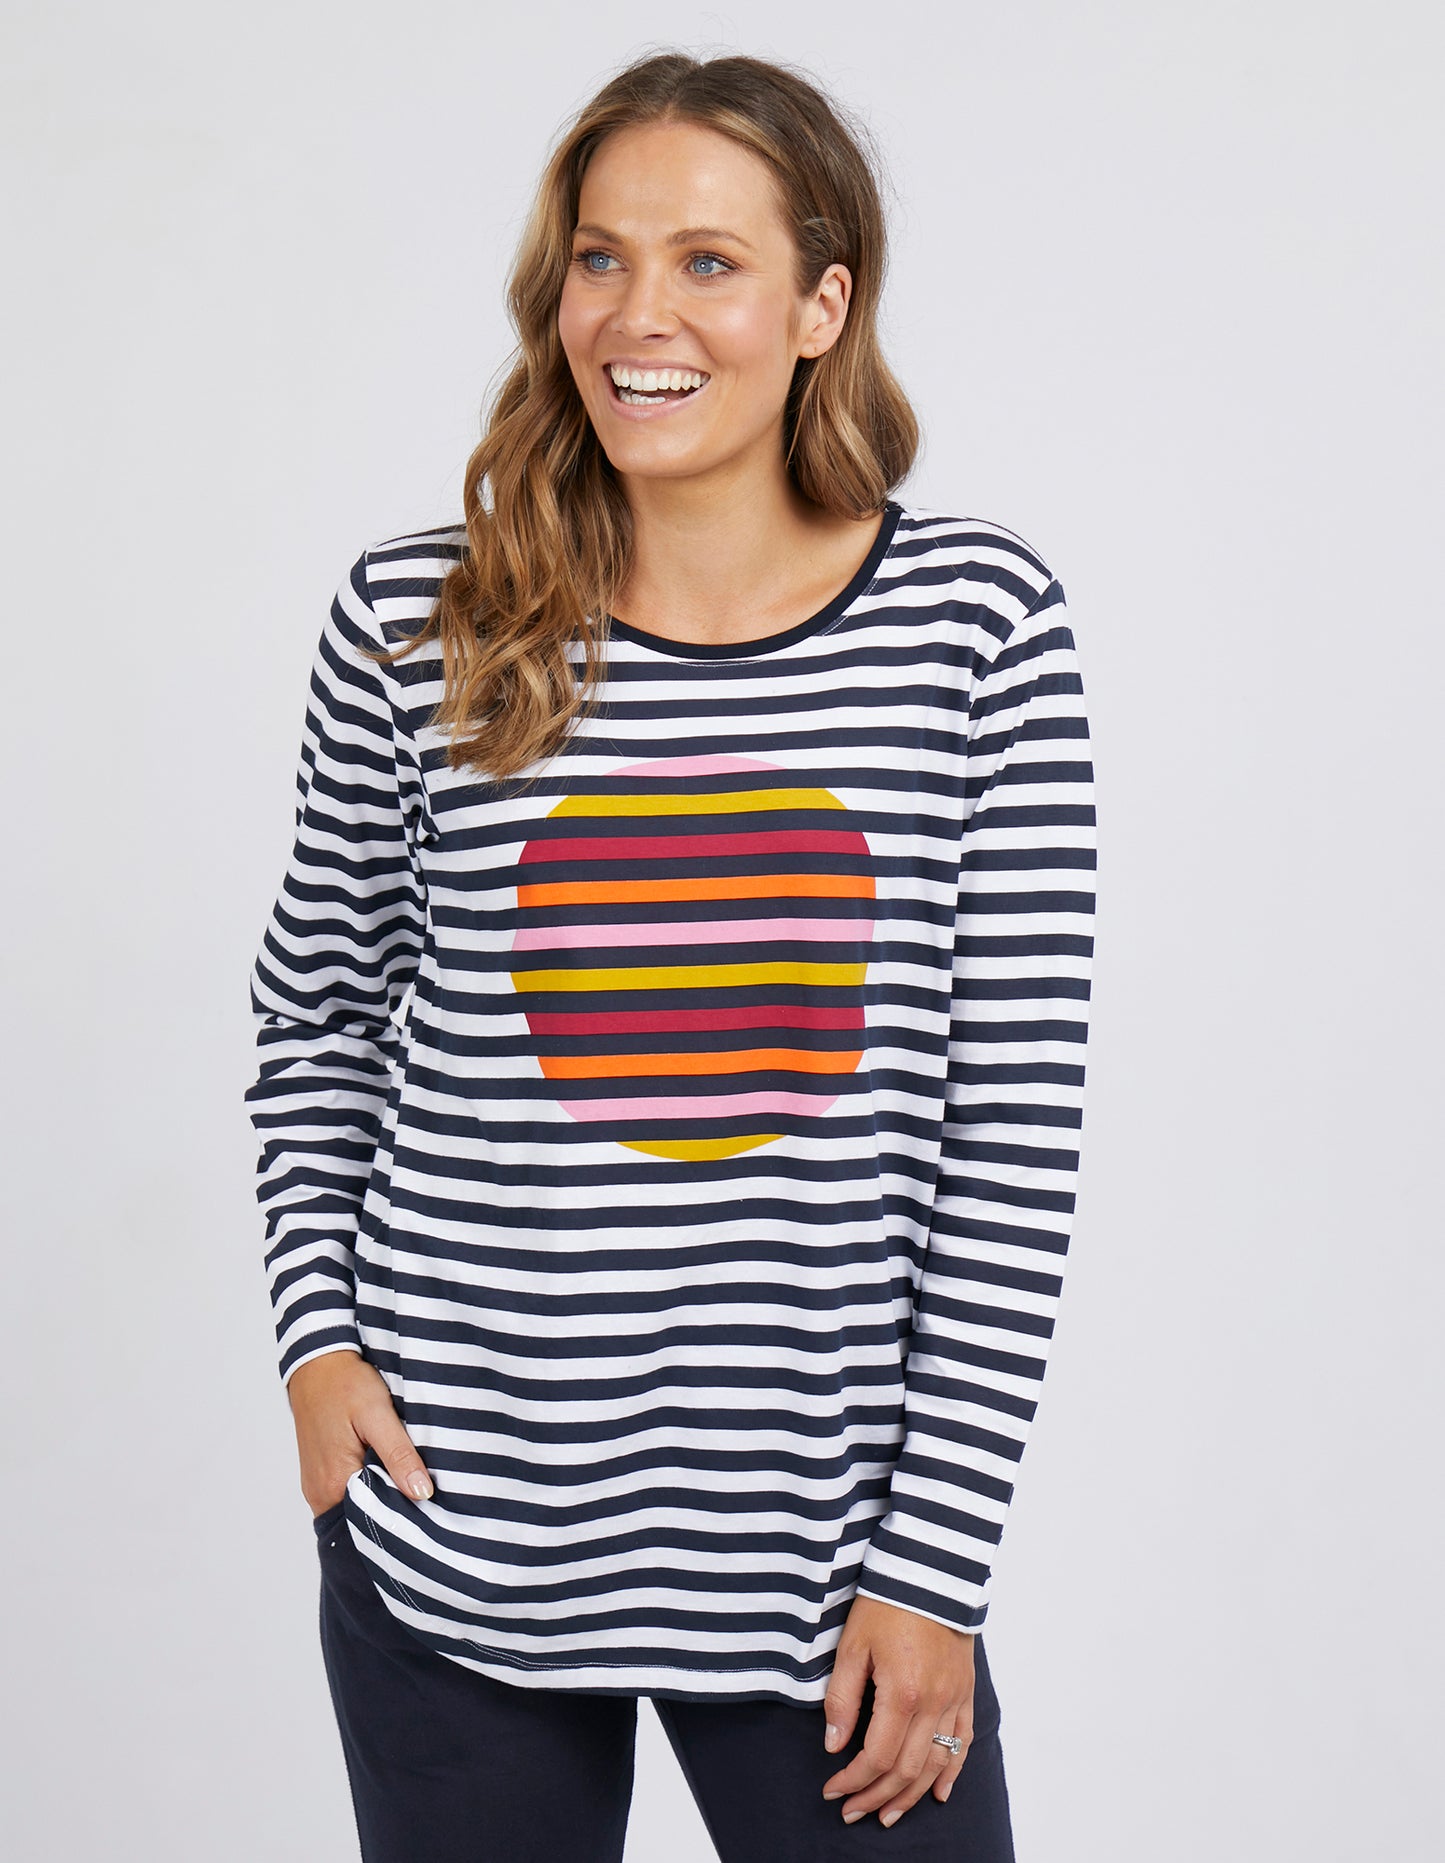 Bonnie Spot L/S Tee - White/Navy/Green/Pink - Elm Lifestyle - FUDGE Gifts Home Lifestyle